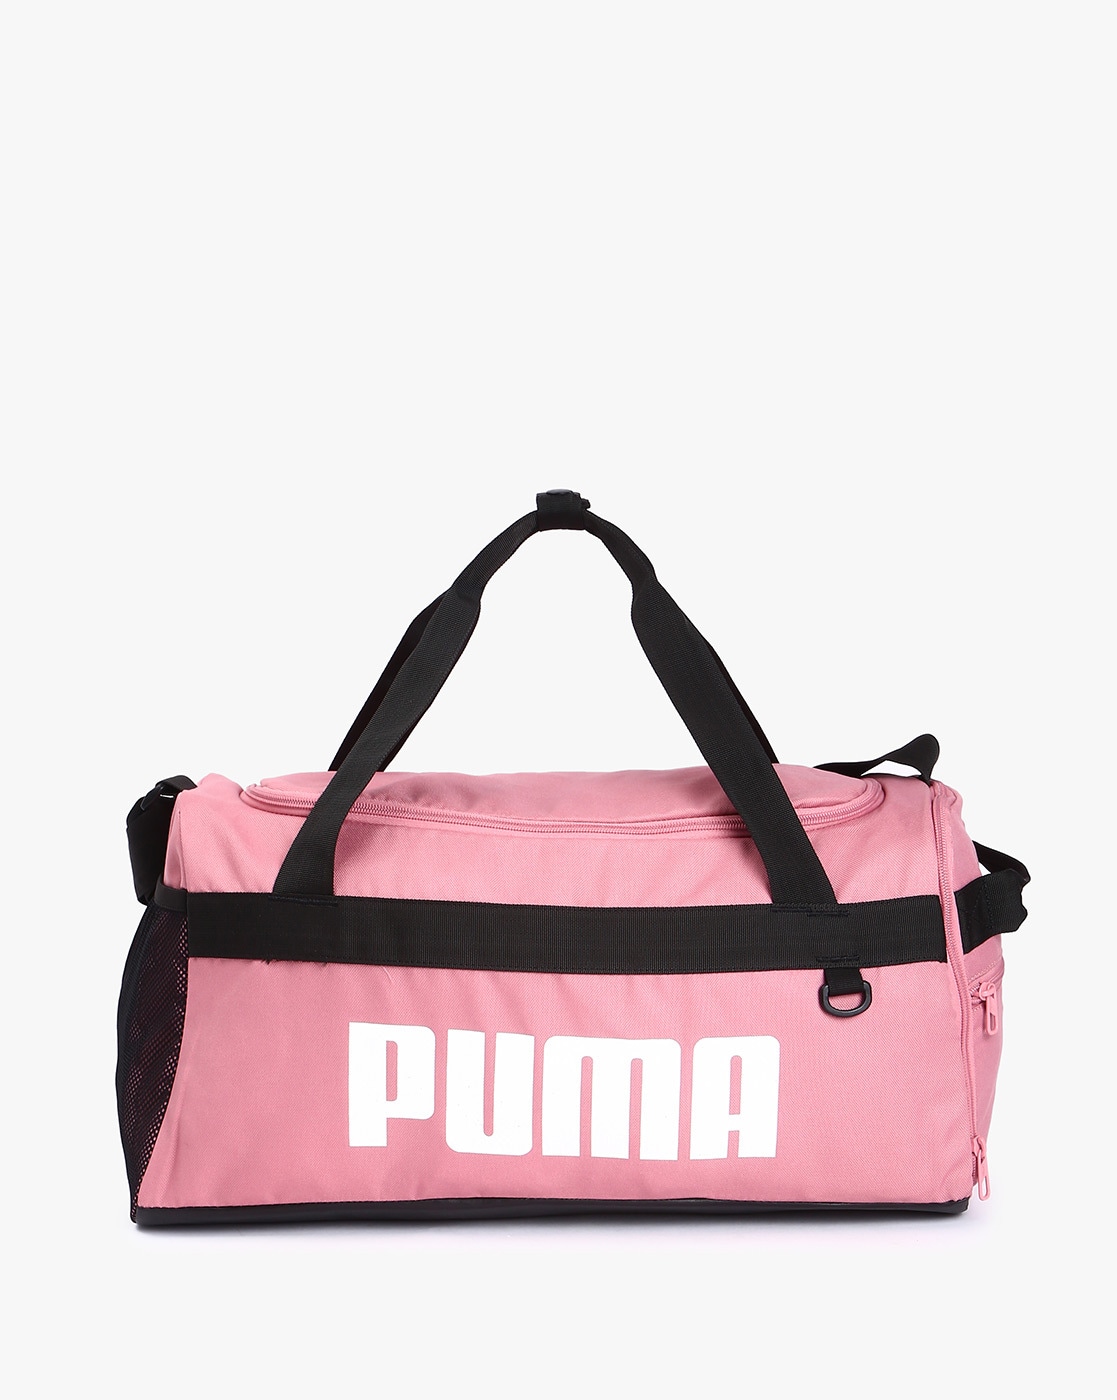 Small Size Duffle Bags  Buy Small Size Duffle Bags online in India